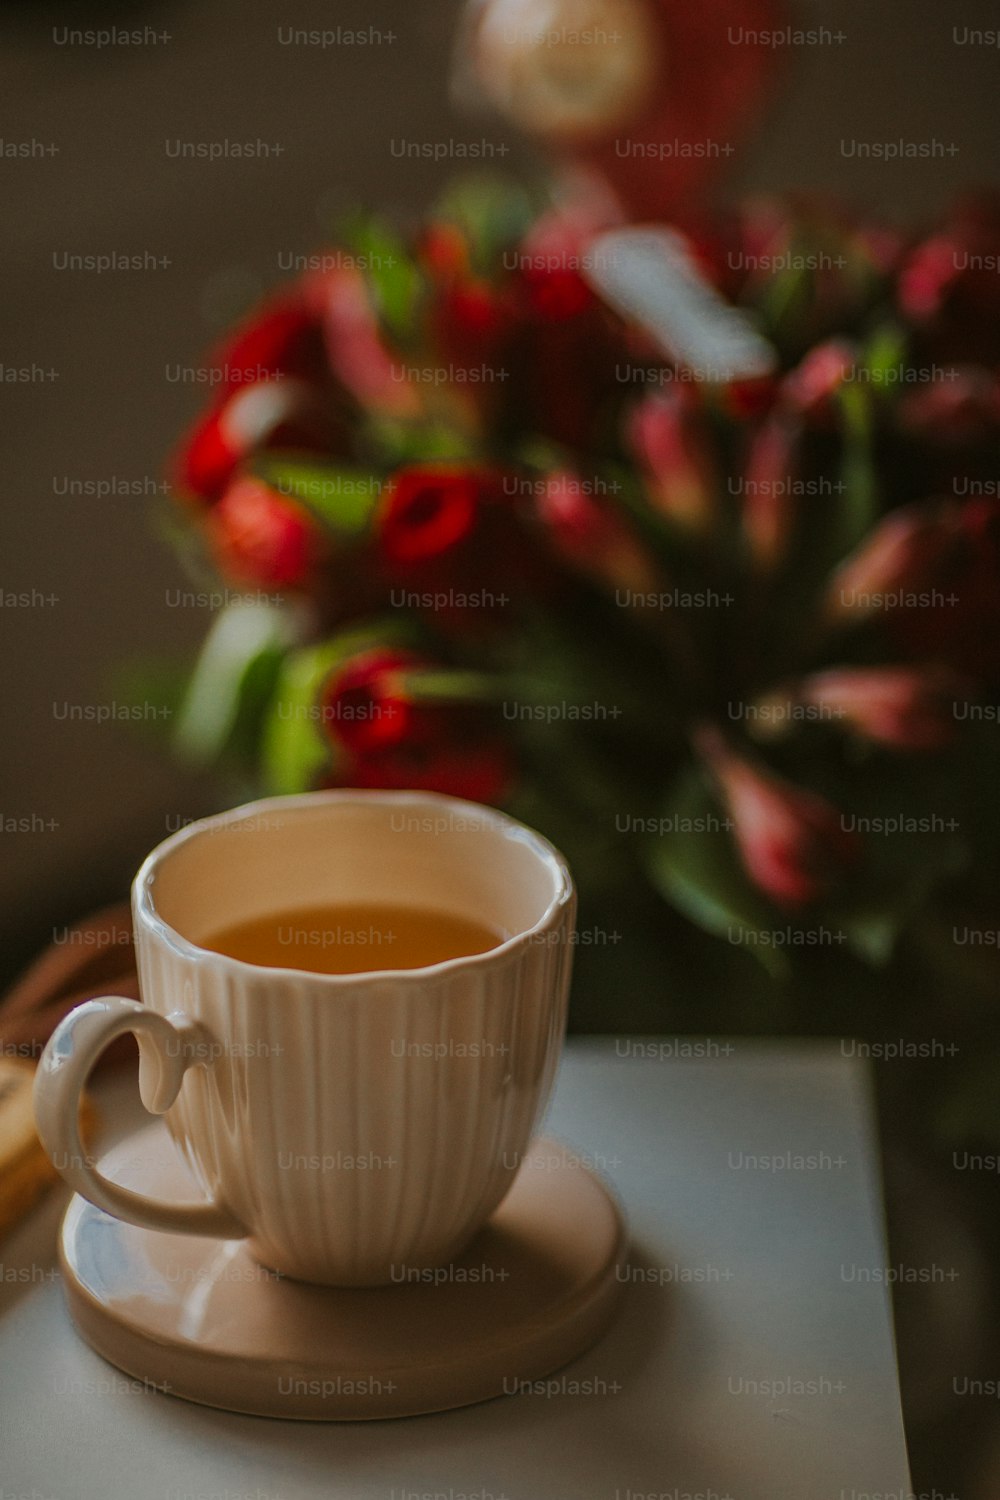 Tea Coffee Vintage Cup Set Vintage Teacup Collection For English Afternoon  Tea Ceremony Stock Illustration - Download Image Now - iStock